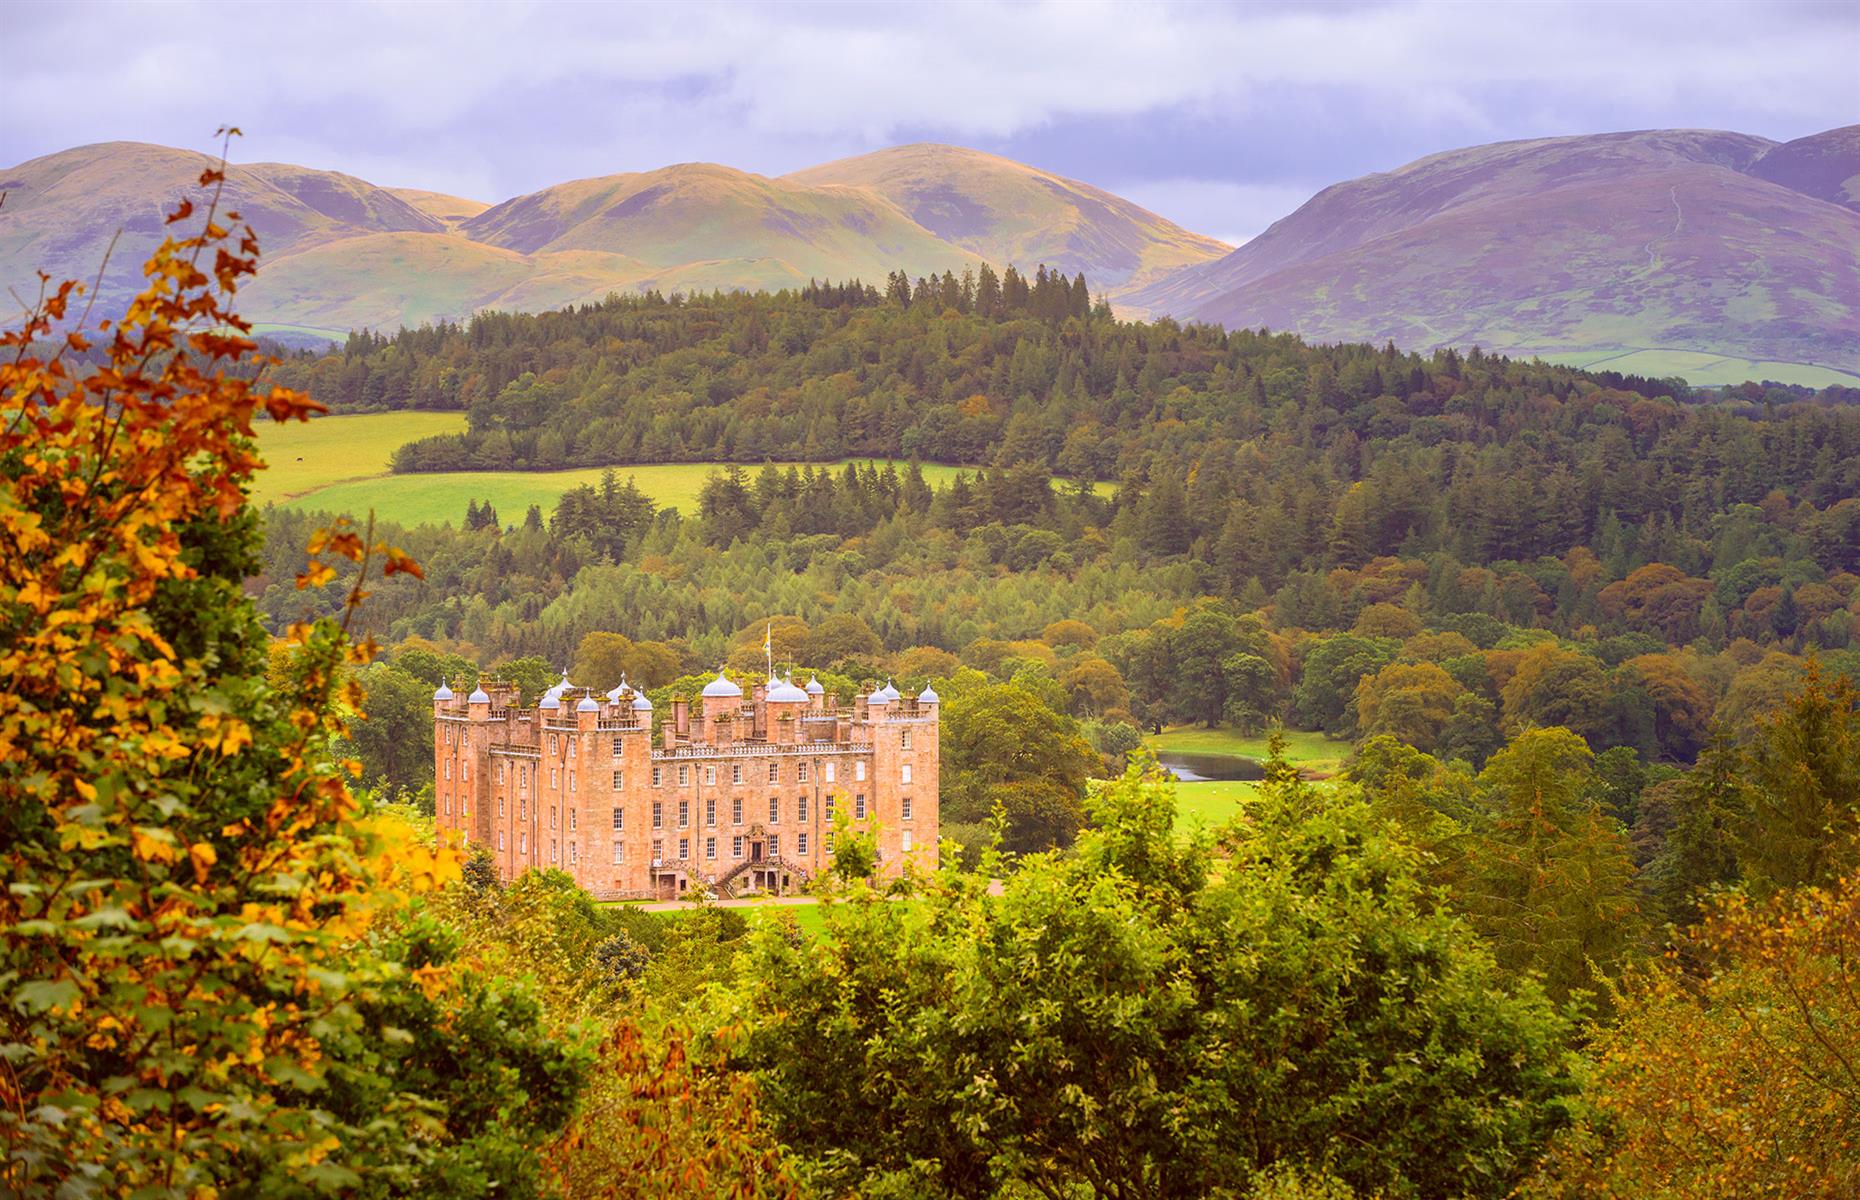 <p>This Renaissance 'pink palace' set amid the rolling hills of Dumfries and Galloway is a genuine treasure trove. While the beautiful architecture and bucolic setting is evident at first sight, what isn't instantly revealed is that <a href="https://www.drumlanrigcastle.co.uk/">Drumlanrig Castle</a> is home to one of the most incredible art collections in Britain, the Buccleuch Collection. Highlights include Rembrandt’s 'An Old Woman Reading' and family portraits by the likes of Sir Joshua Reynolds and Allan Ramsay.</p>